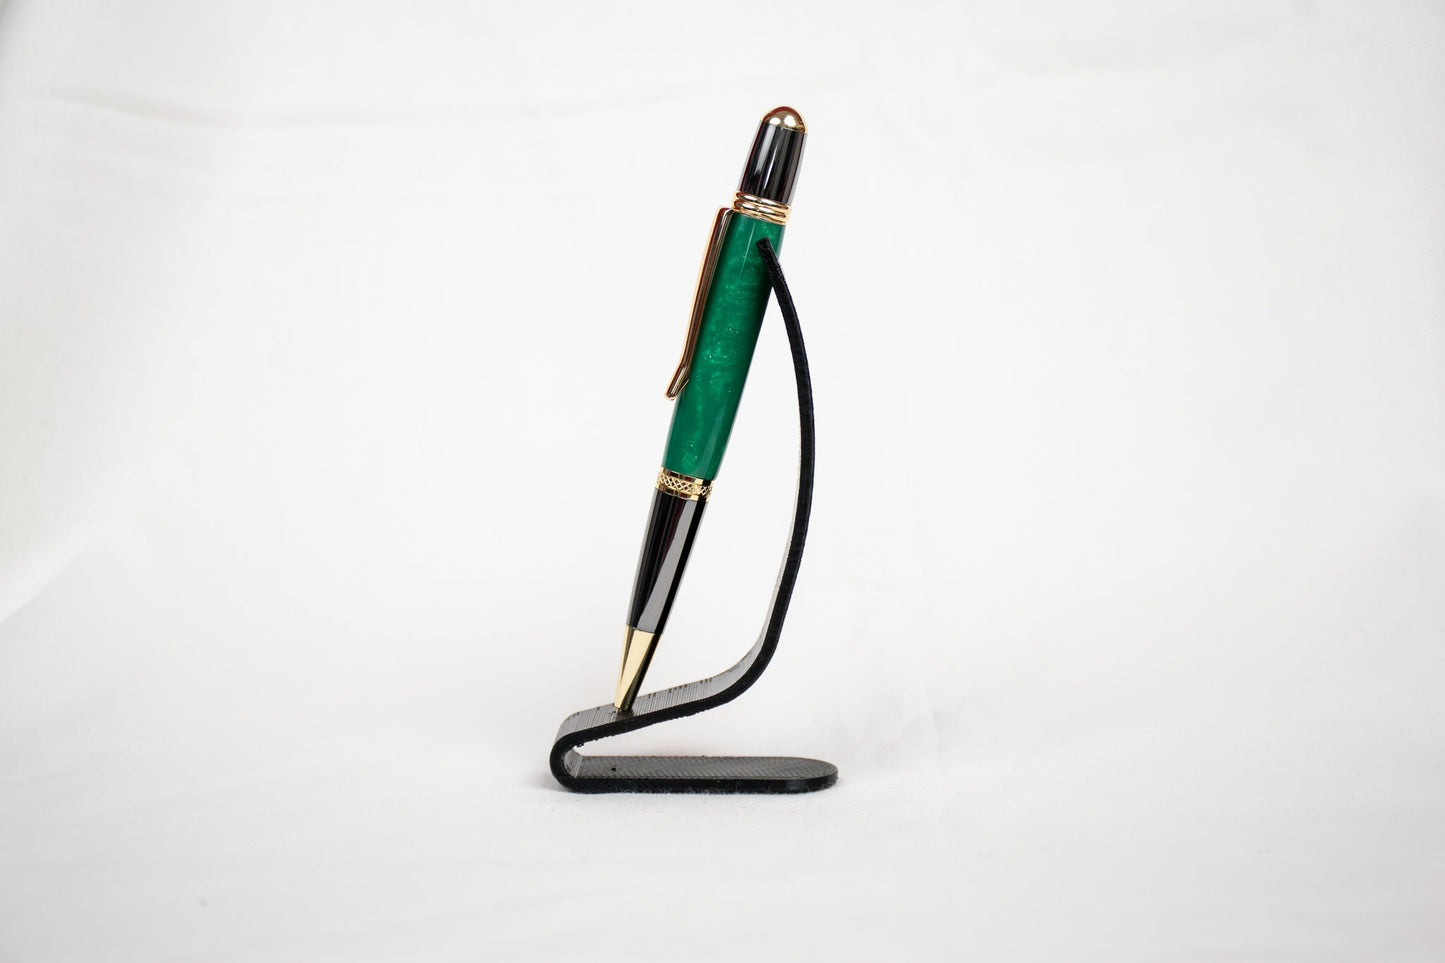 Handmade green and green sparkle resin twist pen with two-tone gunmetal and gold plating